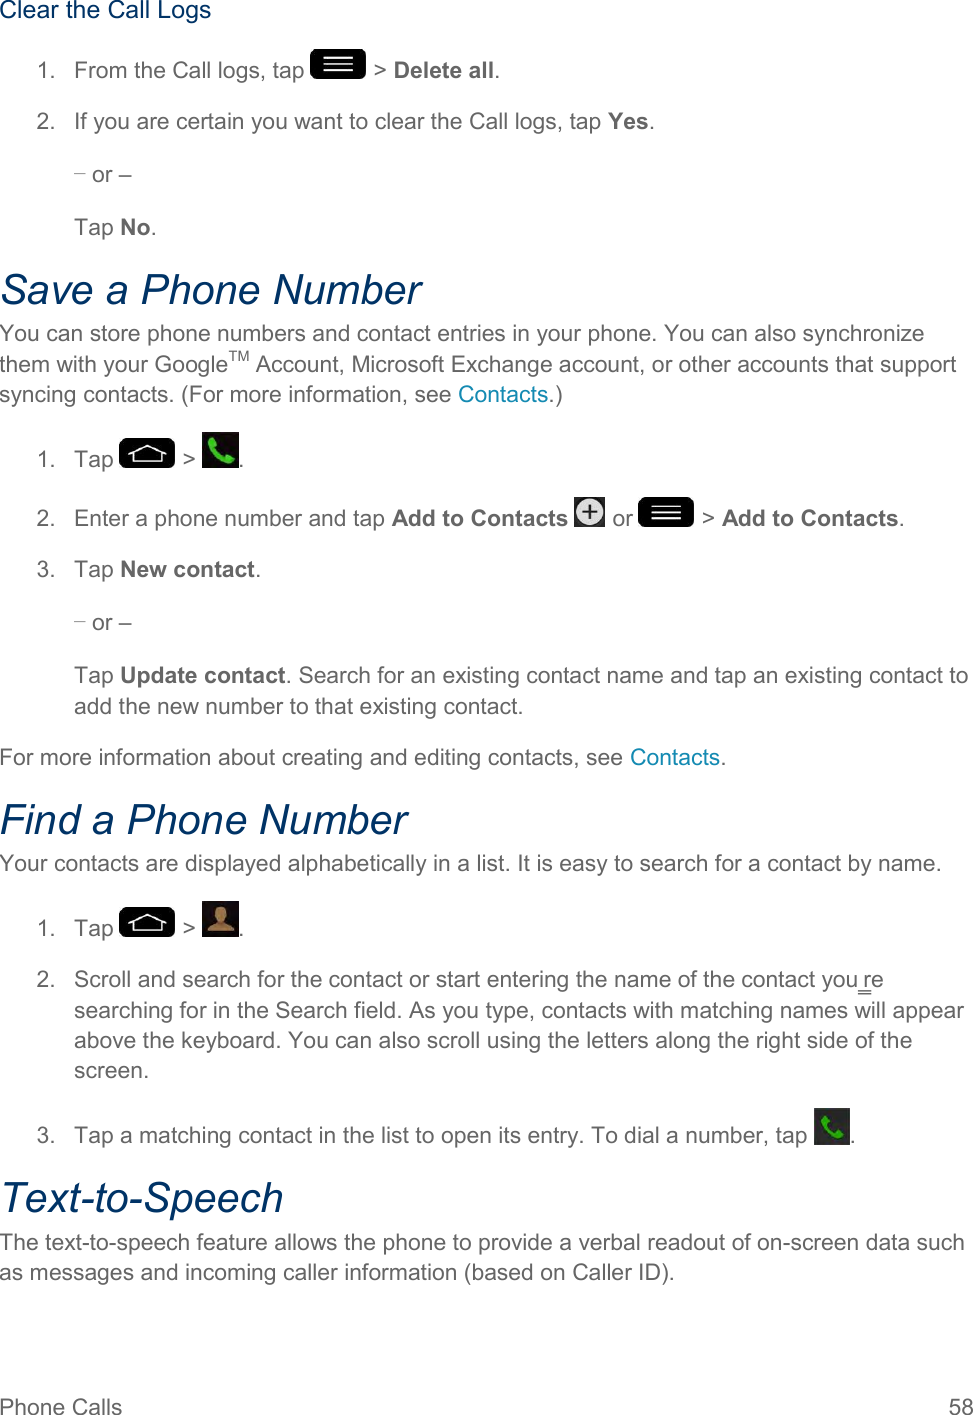 Phone Calls  58 Clear the Call Logs 1.  From the Call logs, tap   &gt; Delete all. 2.  If you are certain you want to clear the Call logs, tap Yes. – or – Tap No. Save a Phone Number You can store phone numbers and contact entries in your phone. You can also synchronize them with your GoogleTM Account, Microsoft Exchange account, or other accounts that support syncing contacts. (For more information, see Contacts.) 1.  Tap   &gt;  . 2.  Enter a phone number and tap Add to Contacts   or   &gt; Add to Contacts. 3.  Tap New contact. – or – Tap Update contact. Search for an existing contact name and tap an existing contact to add the new number to that existing contact. For more information about creating and editing contacts, see Contacts. Find a Phone Number Your contacts are displayed alphabetically in a list. It is easy to search for a contact by name. 1.  Tap   &gt;  . 2.  Scroll and search for the contact or start entering the name of the contact you‗re searching for in the Search field. As you type, contacts with matching names will appear above the keyboard. You can also scroll using the letters along the right side of the screen. 3.  Tap a matching contact in the list to open its entry. To dial a number, tap  . Text-to-Speech The text-to-speech feature allows the phone to provide a verbal readout of on-screen data such as messages and incoming caller information (based on Caller ID). 